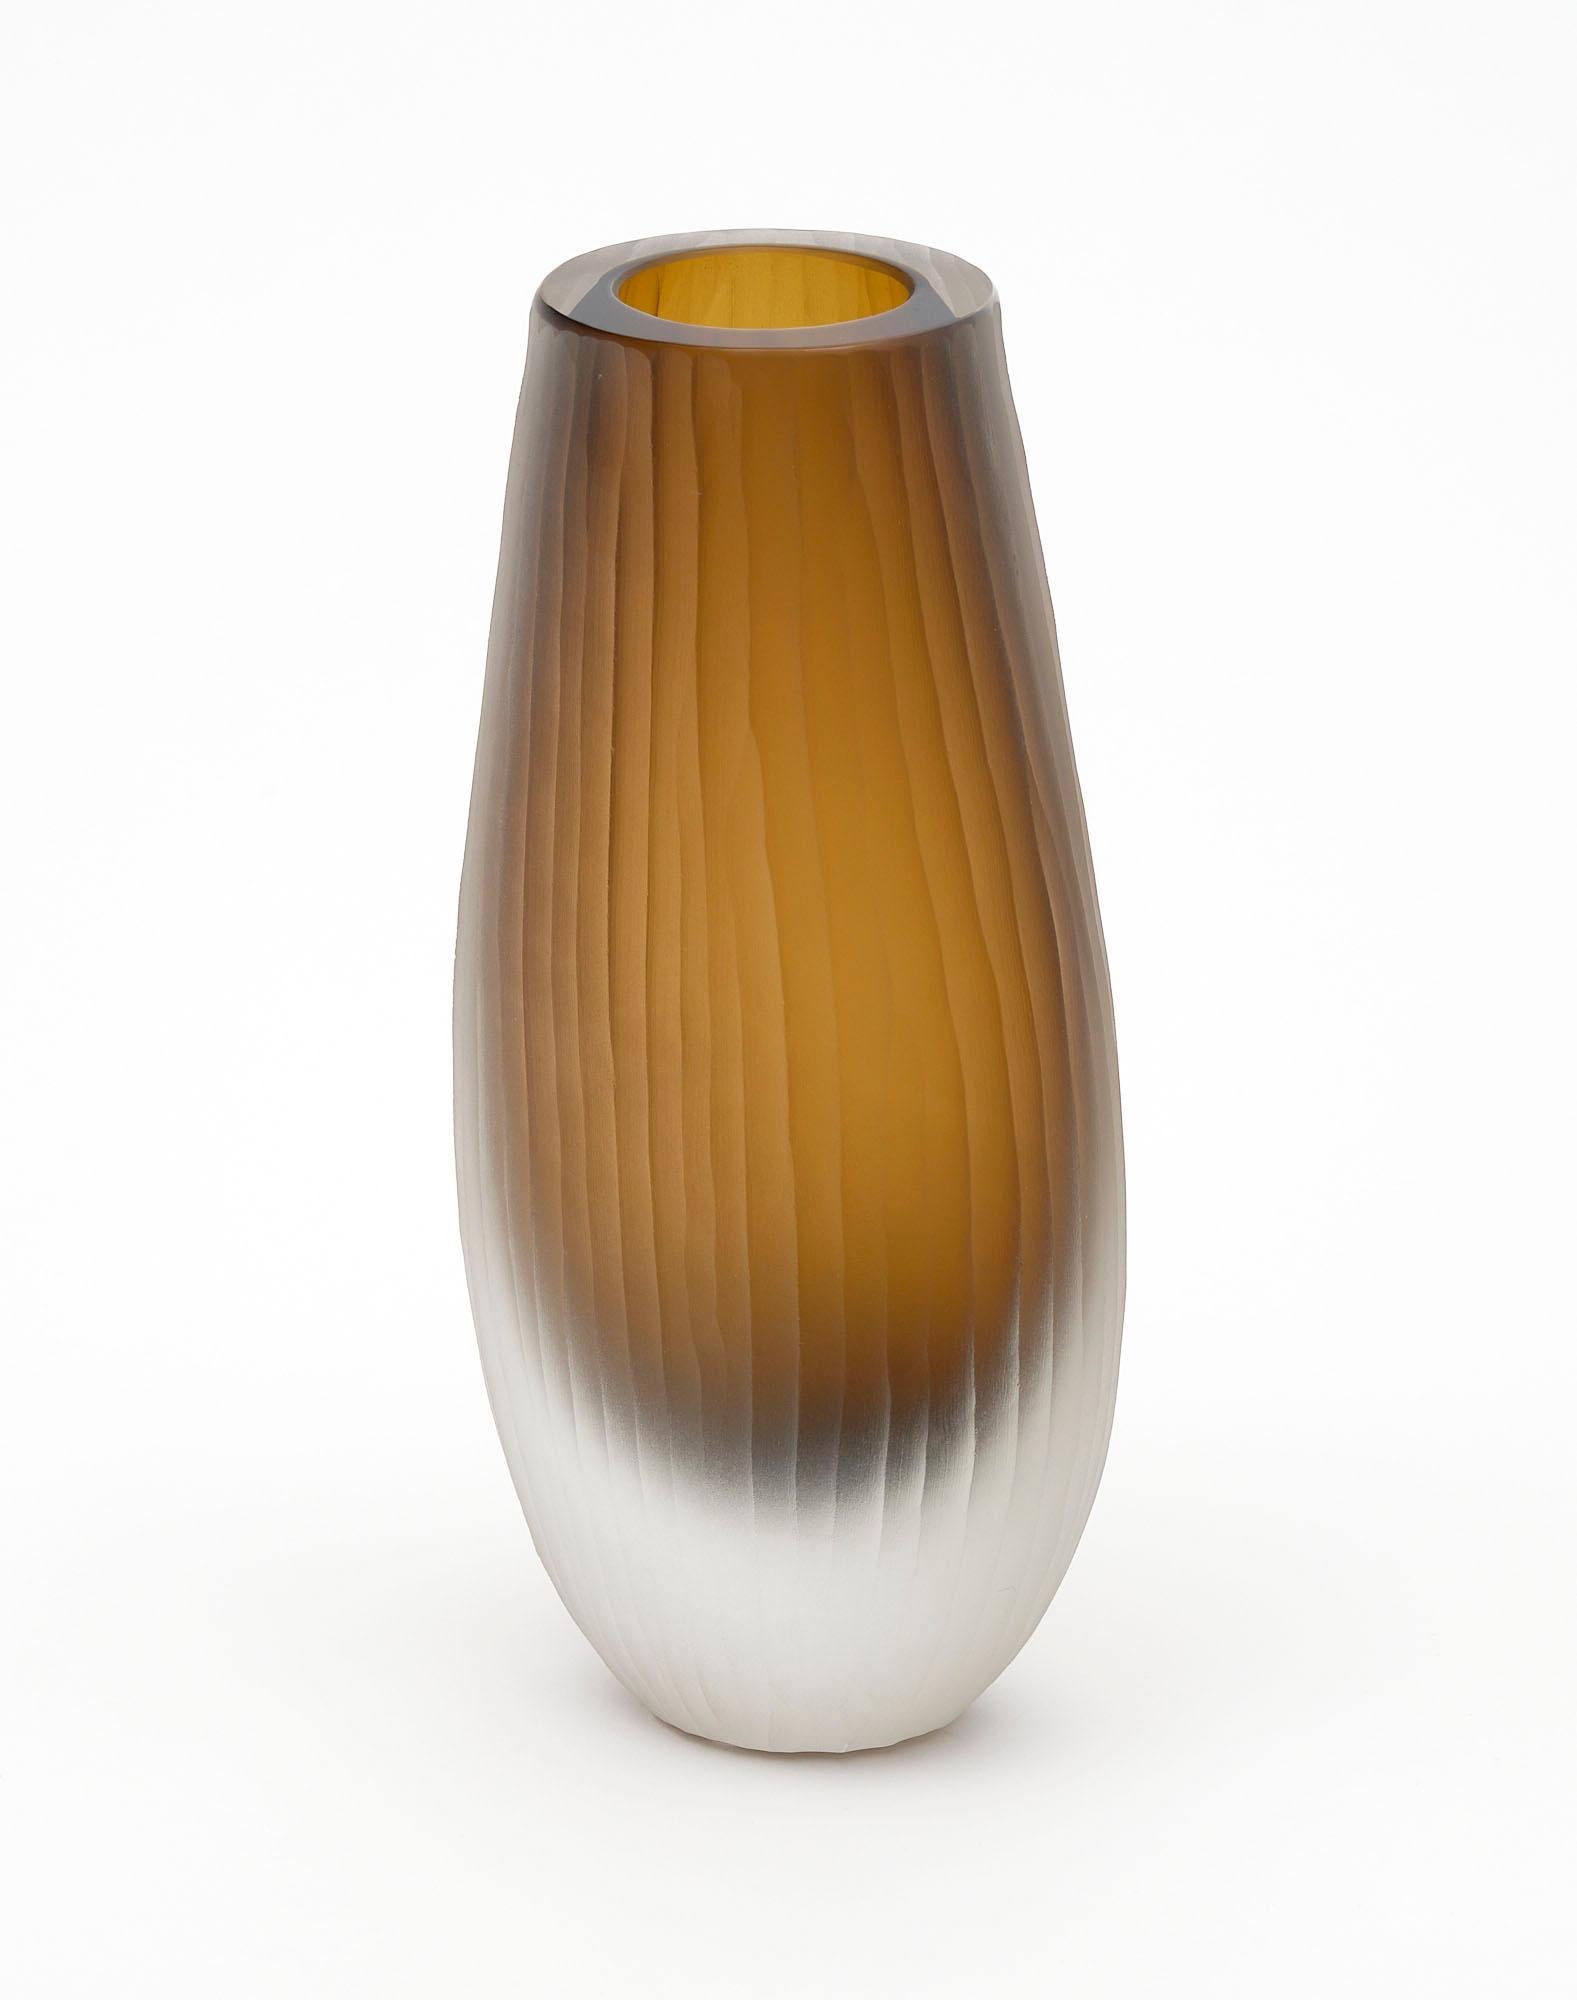 Hand-Crafted Murano Glass Tobacco Trio of Vases in the Manner of Tobia Scarpa